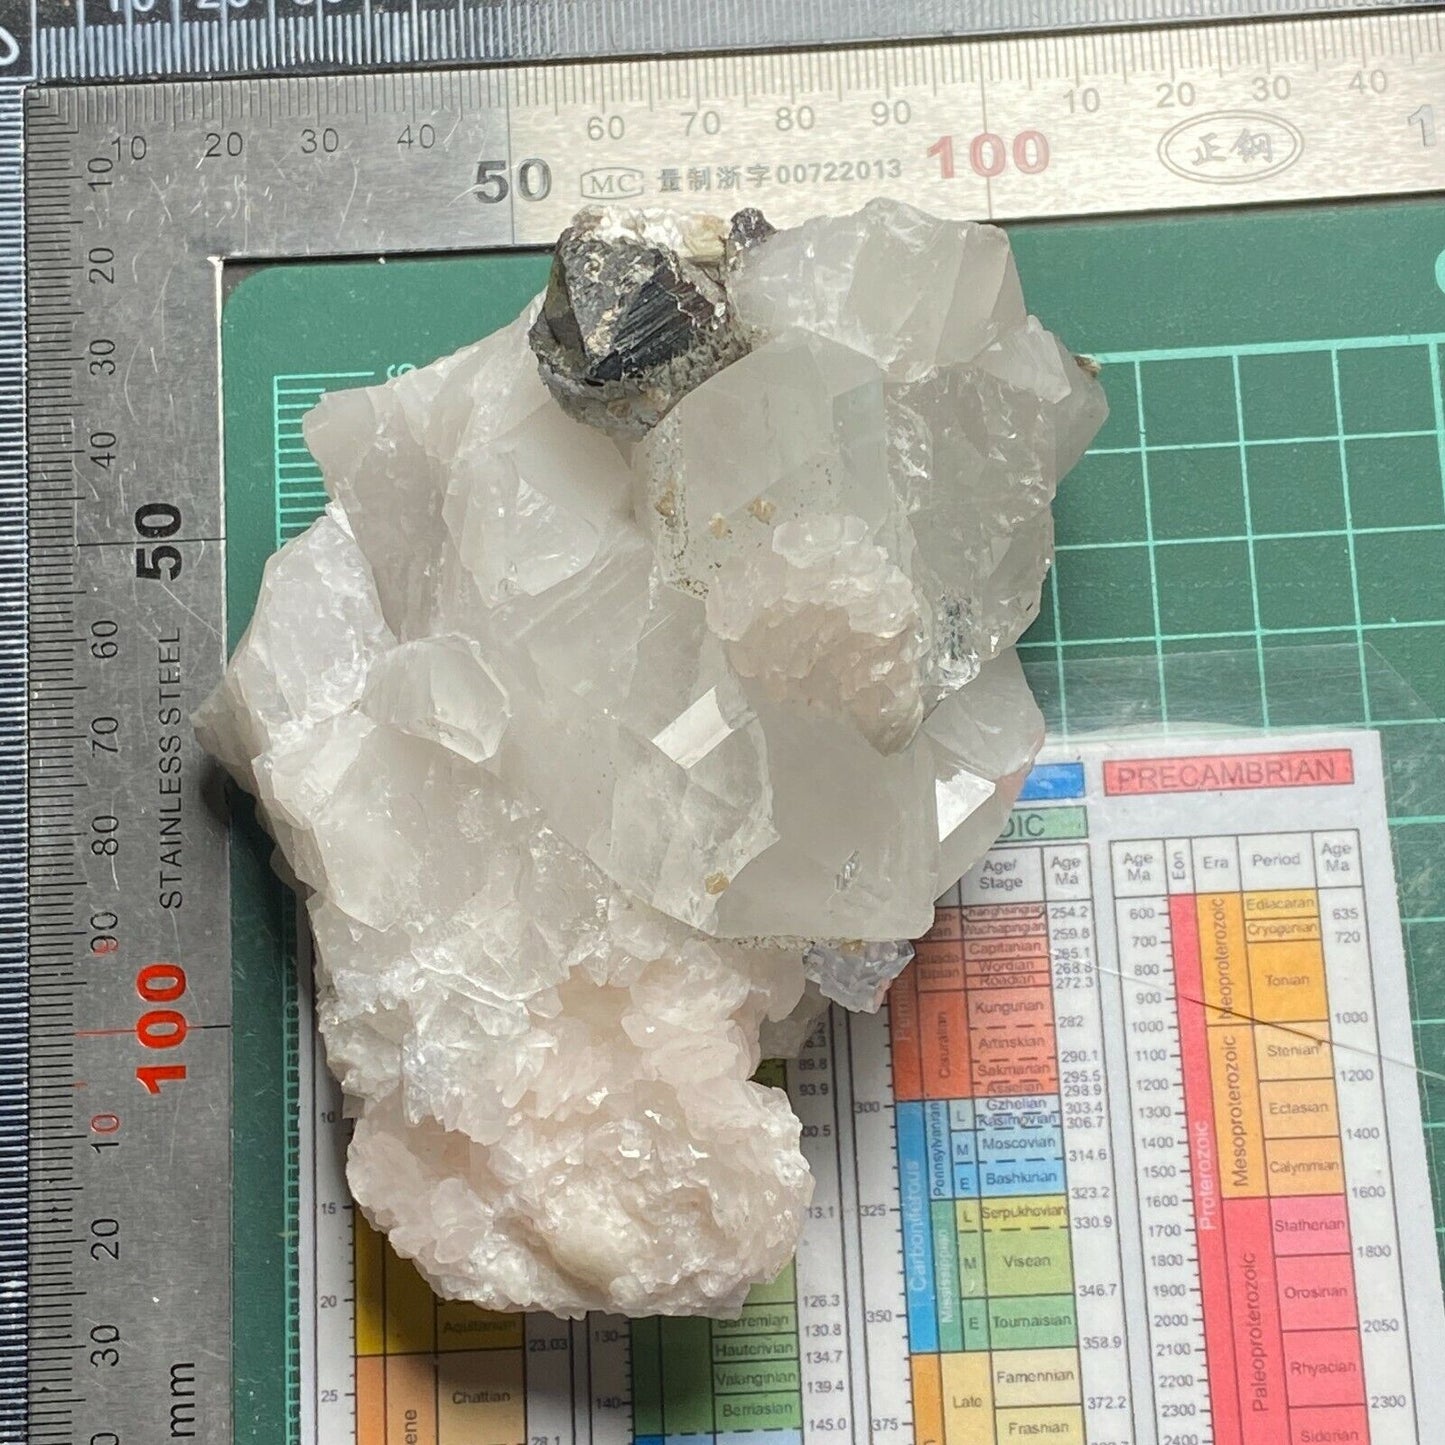 QUARTZ ASSEMBLAGE WITH PYRITE FROM THE HIMALAYAS 447g MF8346